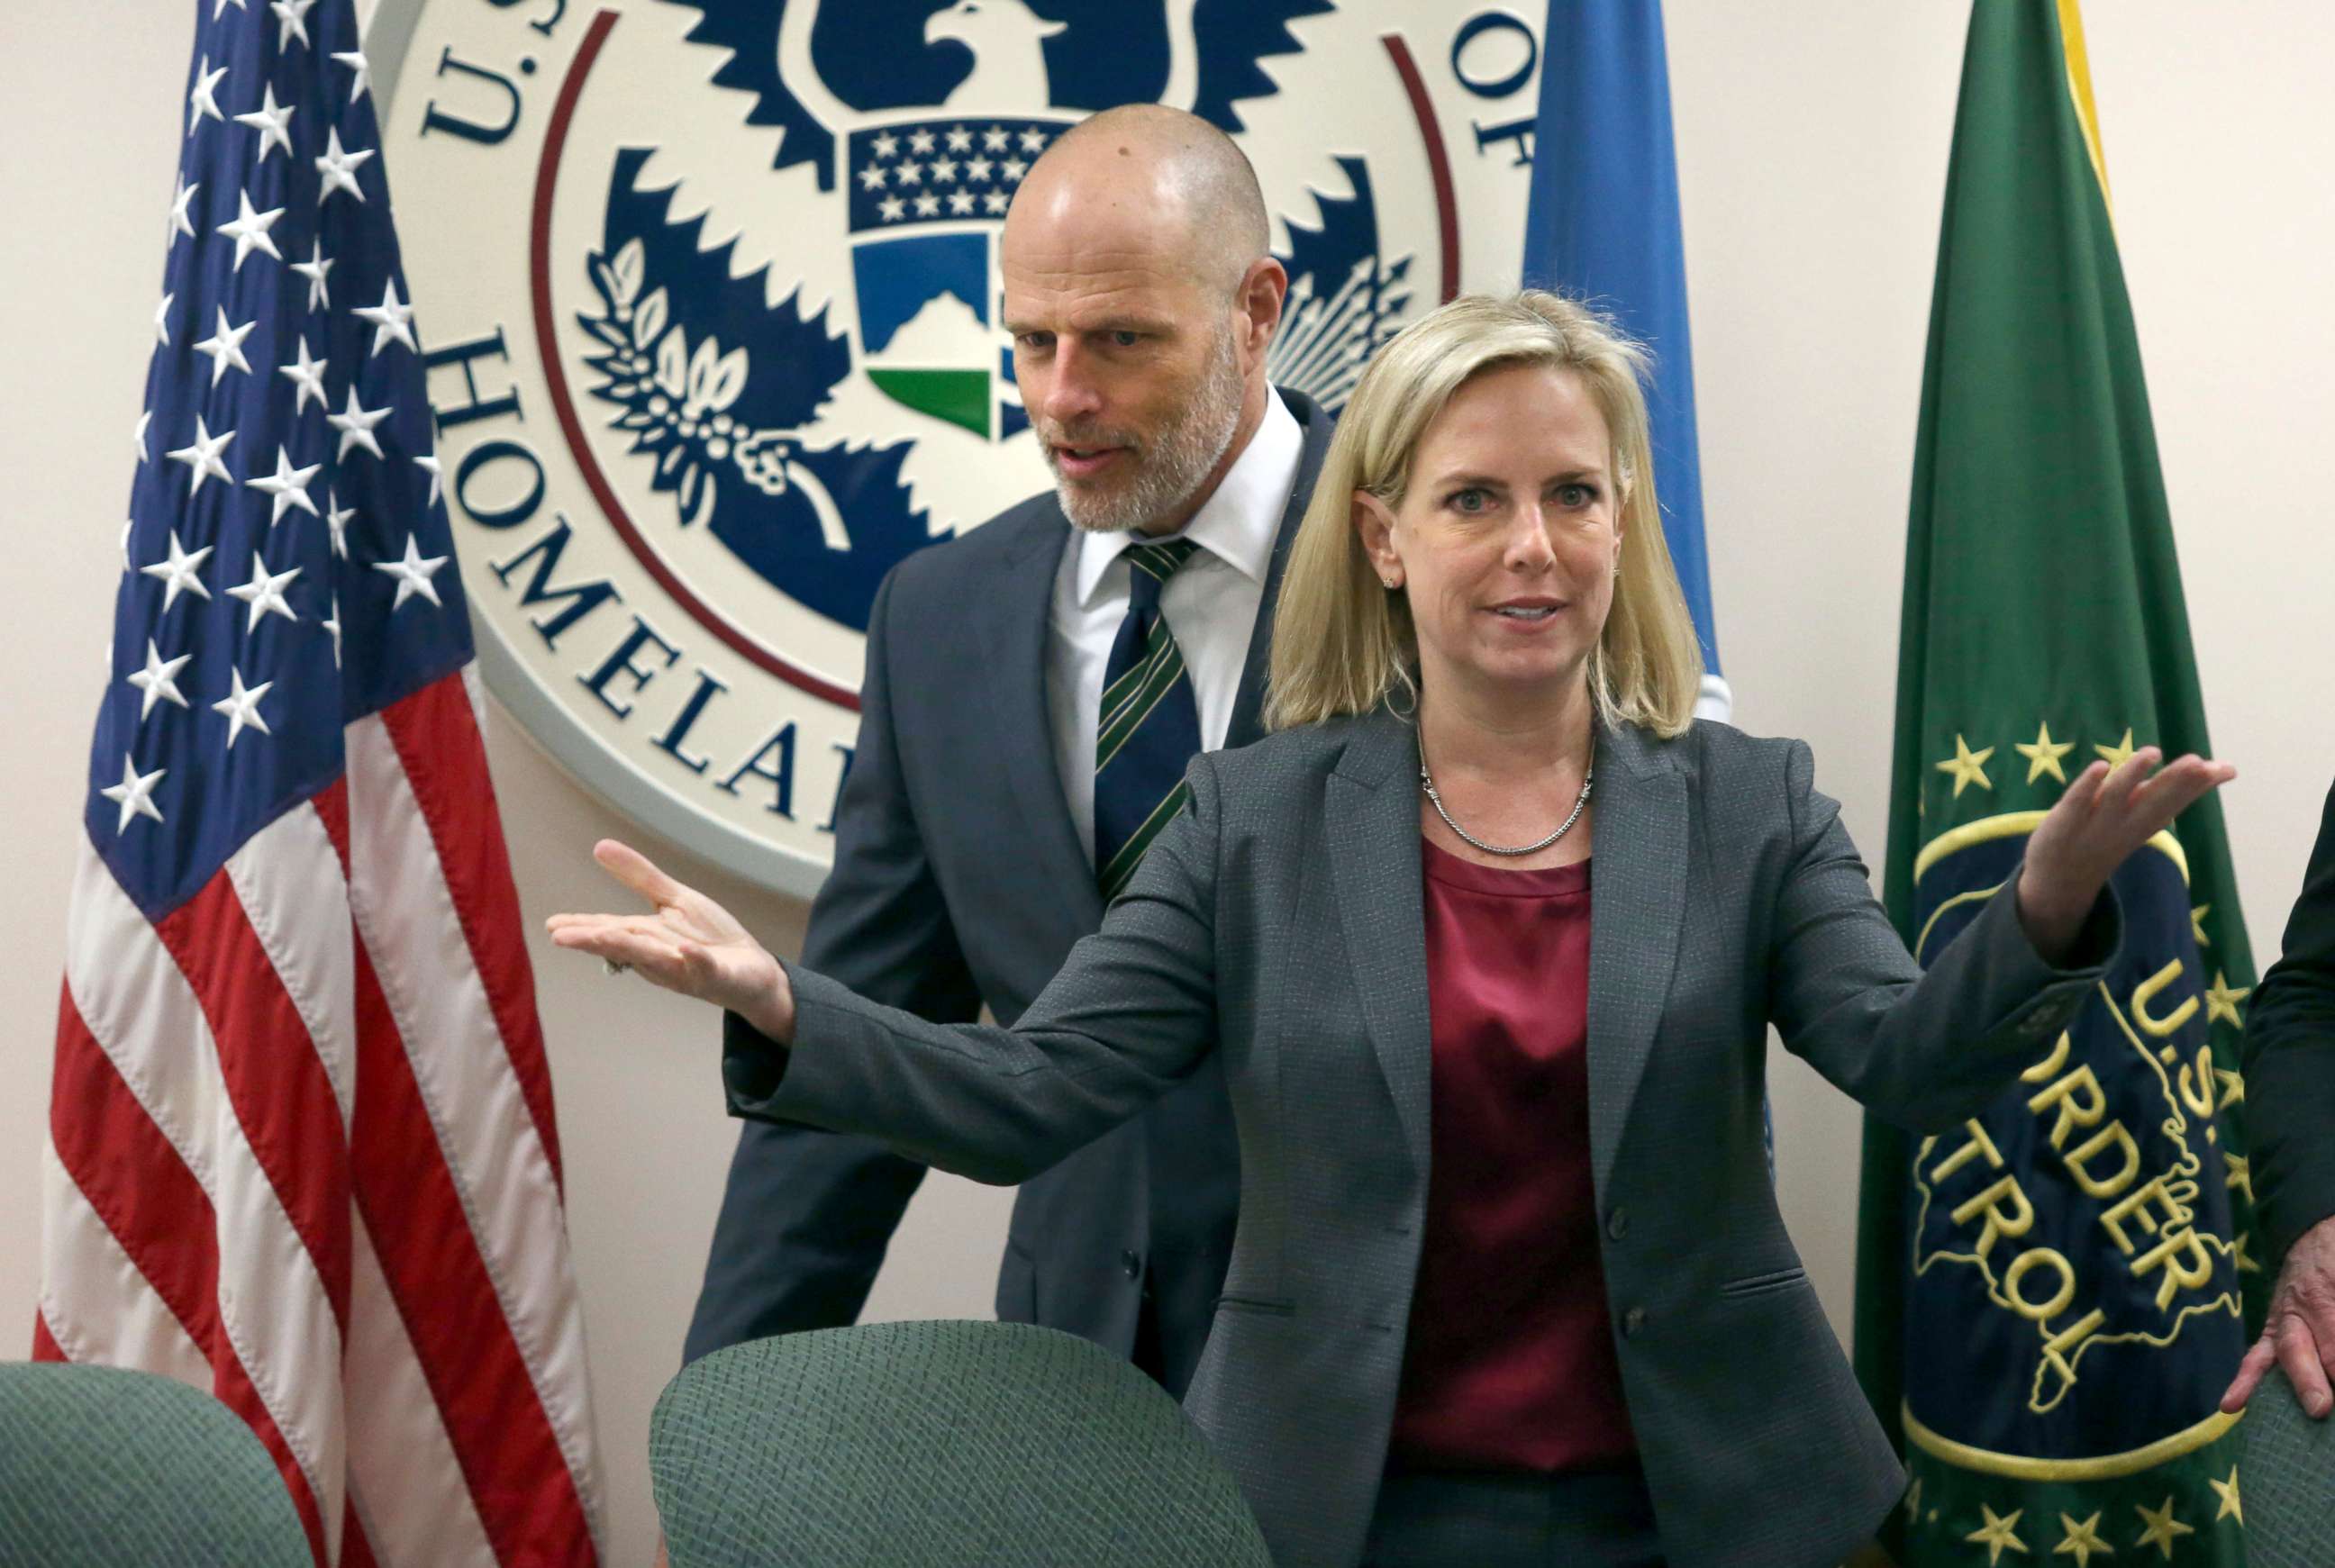 PHOTO: Kirstjen Nielsen, the secretary of Homeland Security and Ronald Vitiello, visited the Rio Grande Valley on Thursday to meet with local law enforcement at the Rio Grande Border Patrol Sector on March, 21, 2019 in McAllen, Texas.